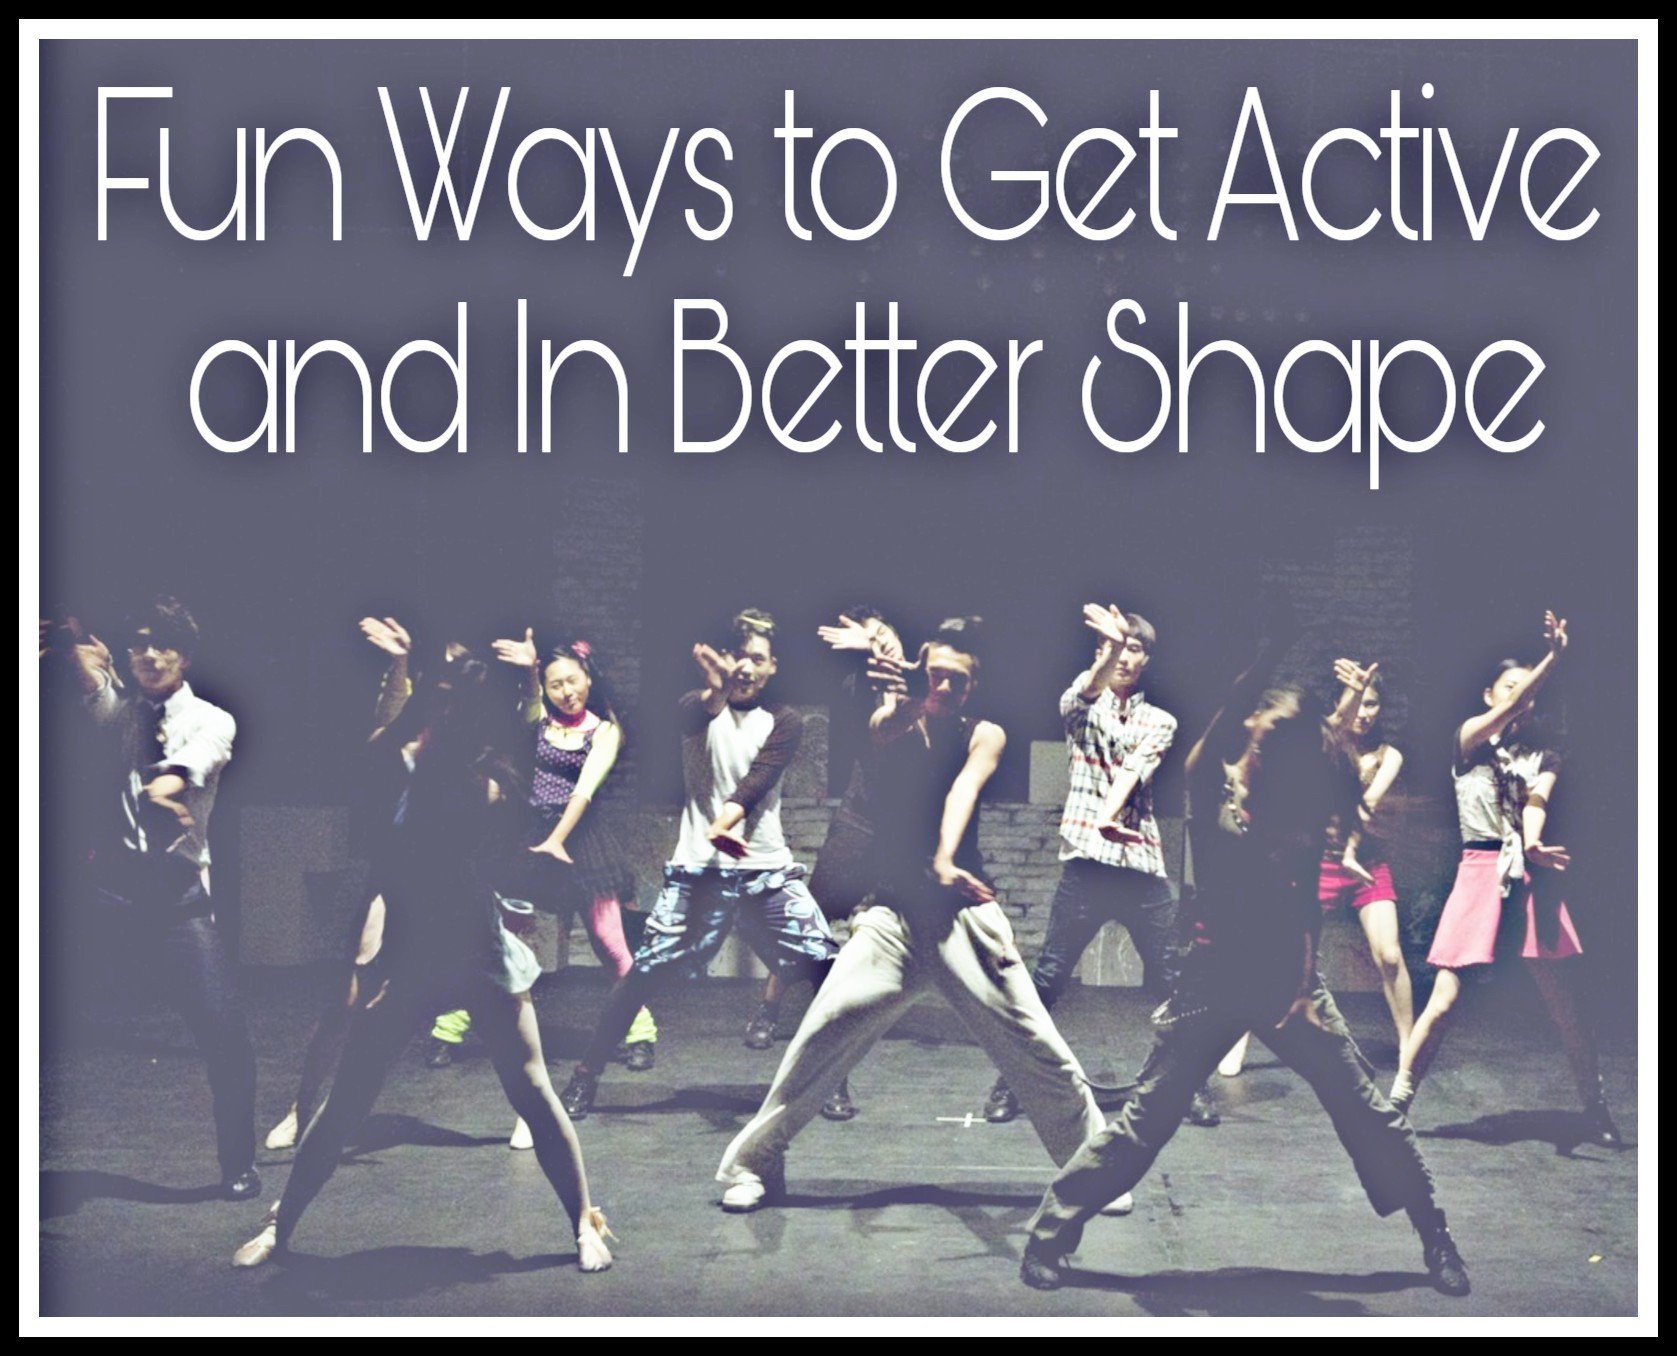 Fun Ways to Get Active and In Better Shape title on background image of people dancing.